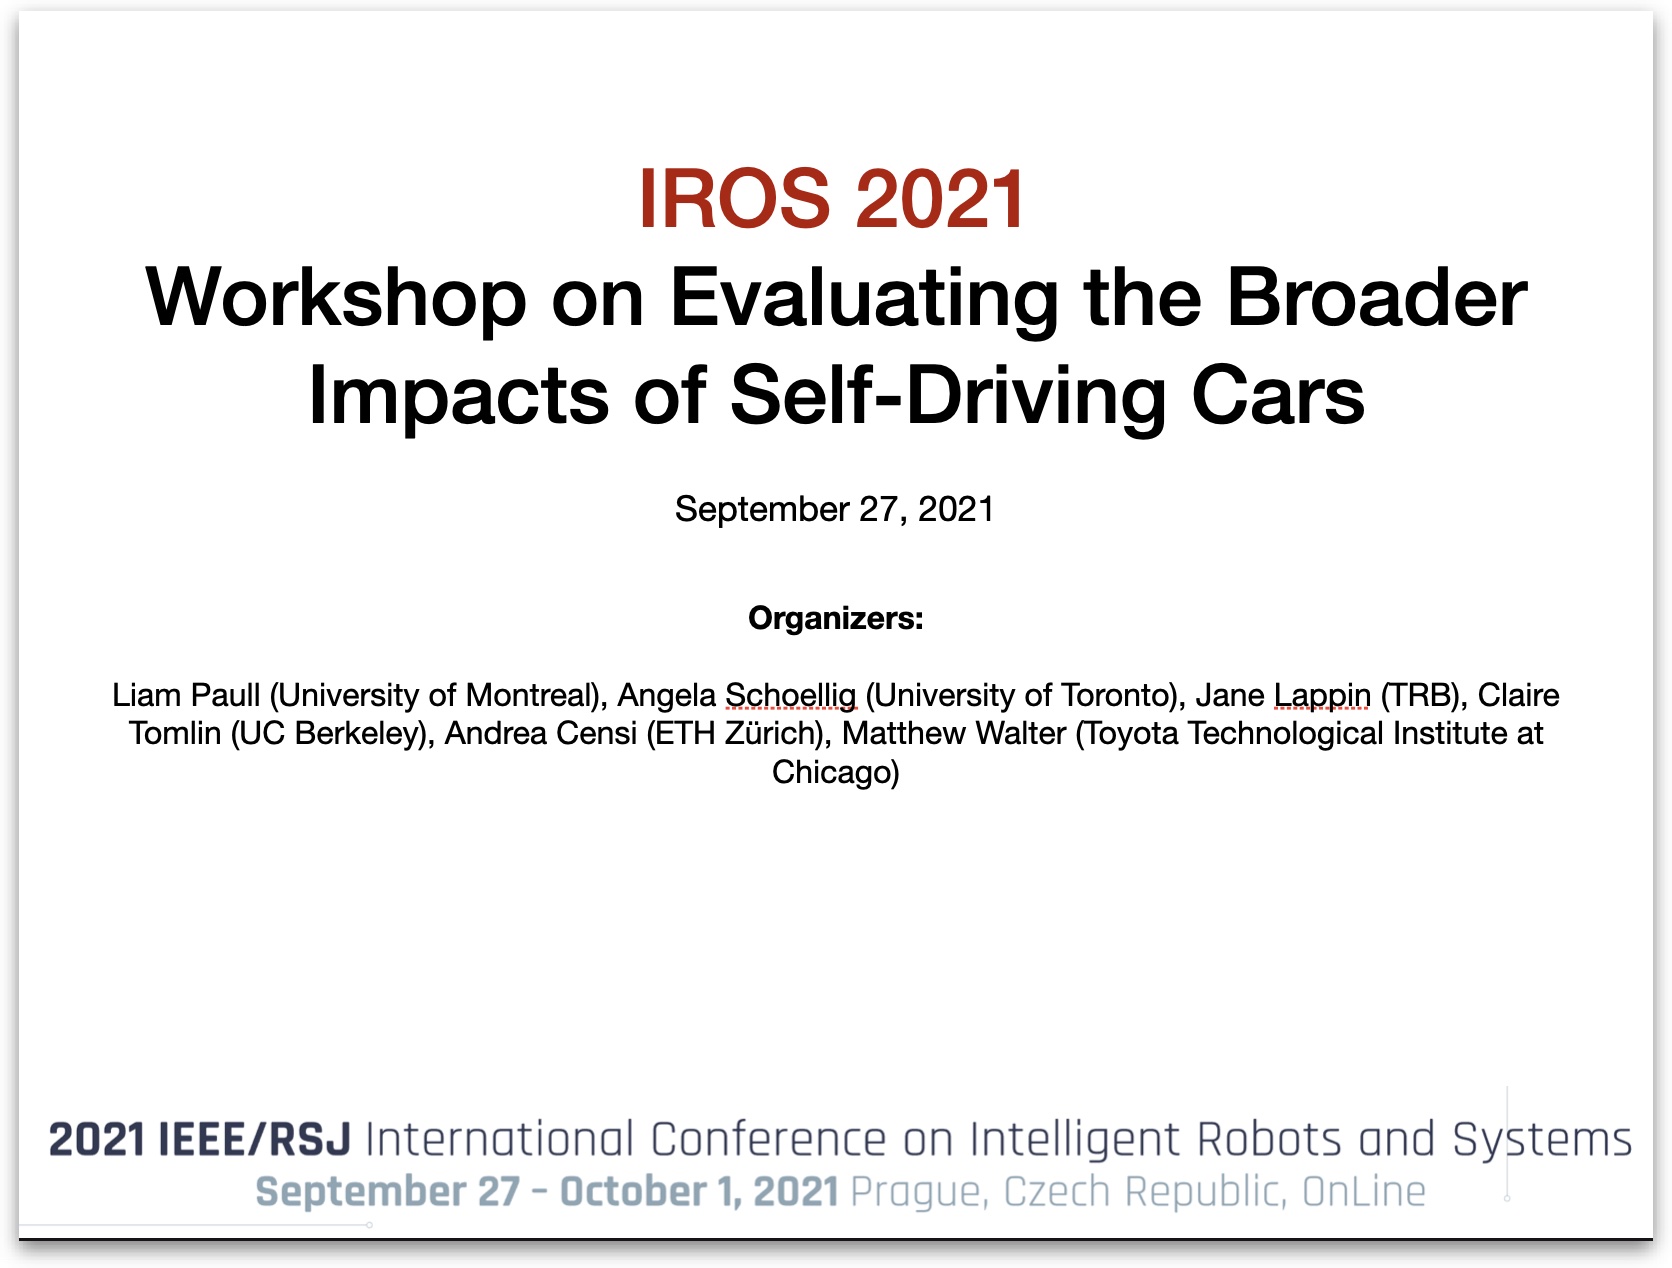 IROS 2021 Workshop on Evaluating the Broader Impacts of Self-Driving Cars